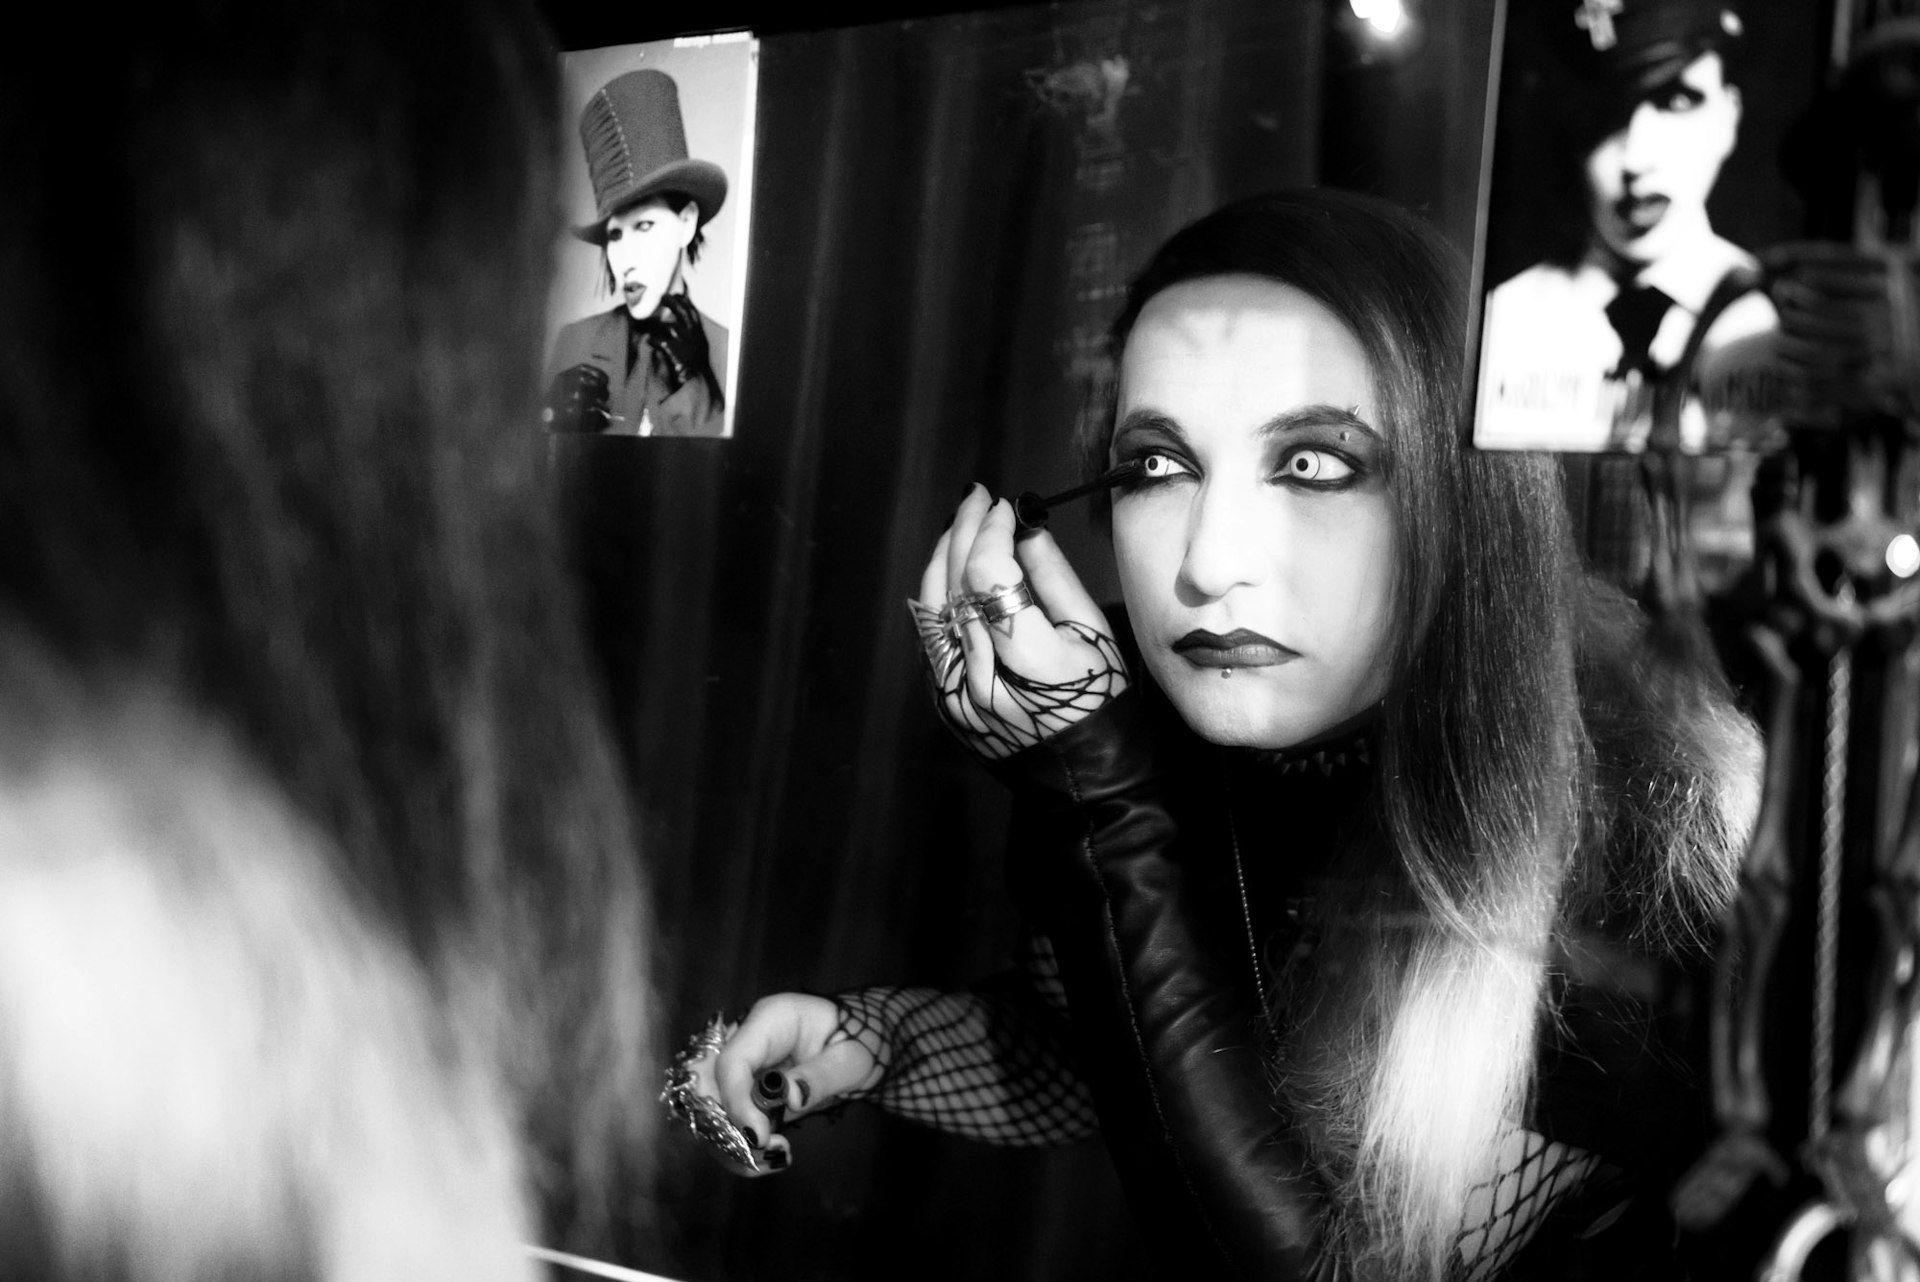 Like his partner, Bella, 22-year-old Sandro “Manson” has dressed in gothic style every day for the past eight years. Studying tourism, Sandro is also a photographer and musician. “Gothic culture is my muse,”he says. “This subculture is very closed and distinct from others. It has a huge emotional and aesthetic aspect.”